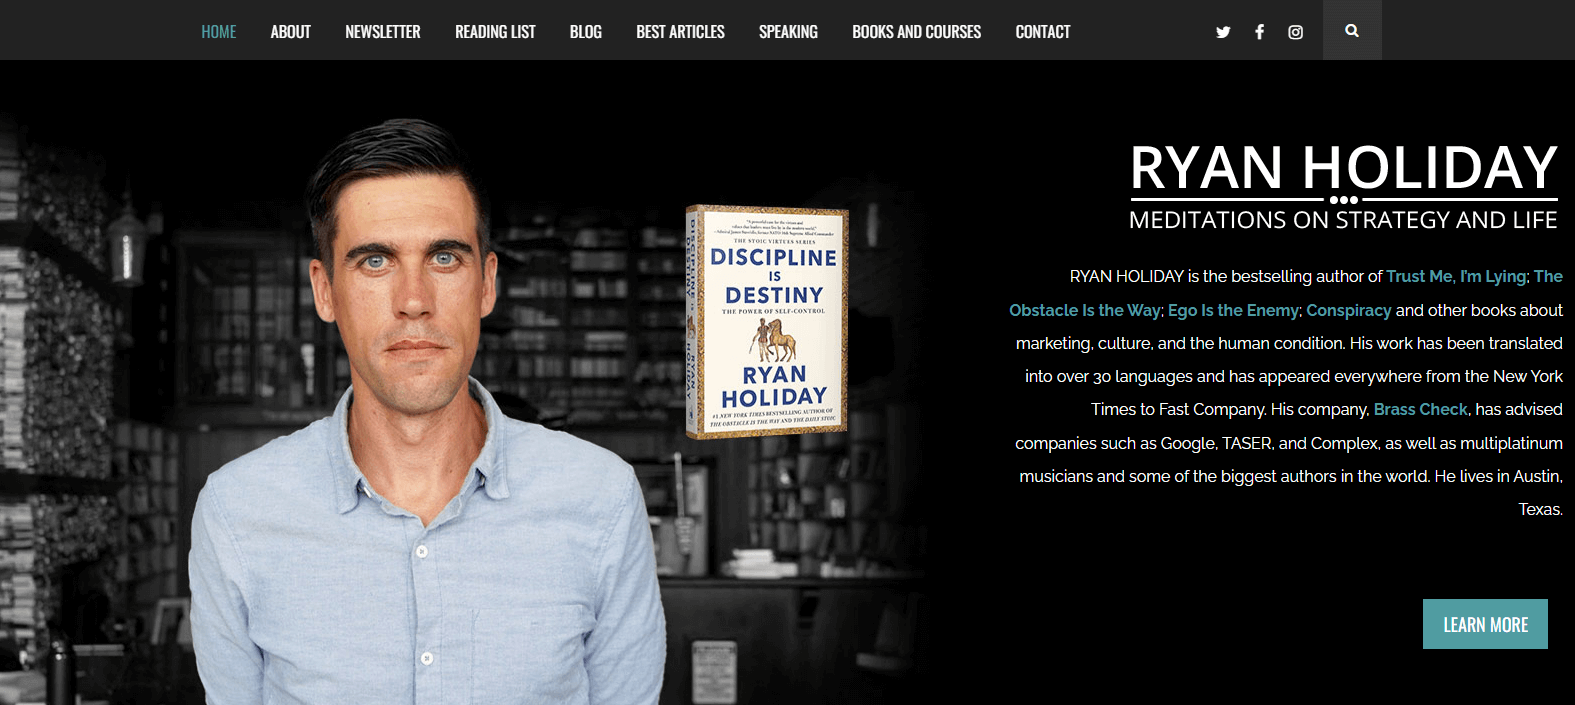 One of the best blogs on life by Ryan Holiday